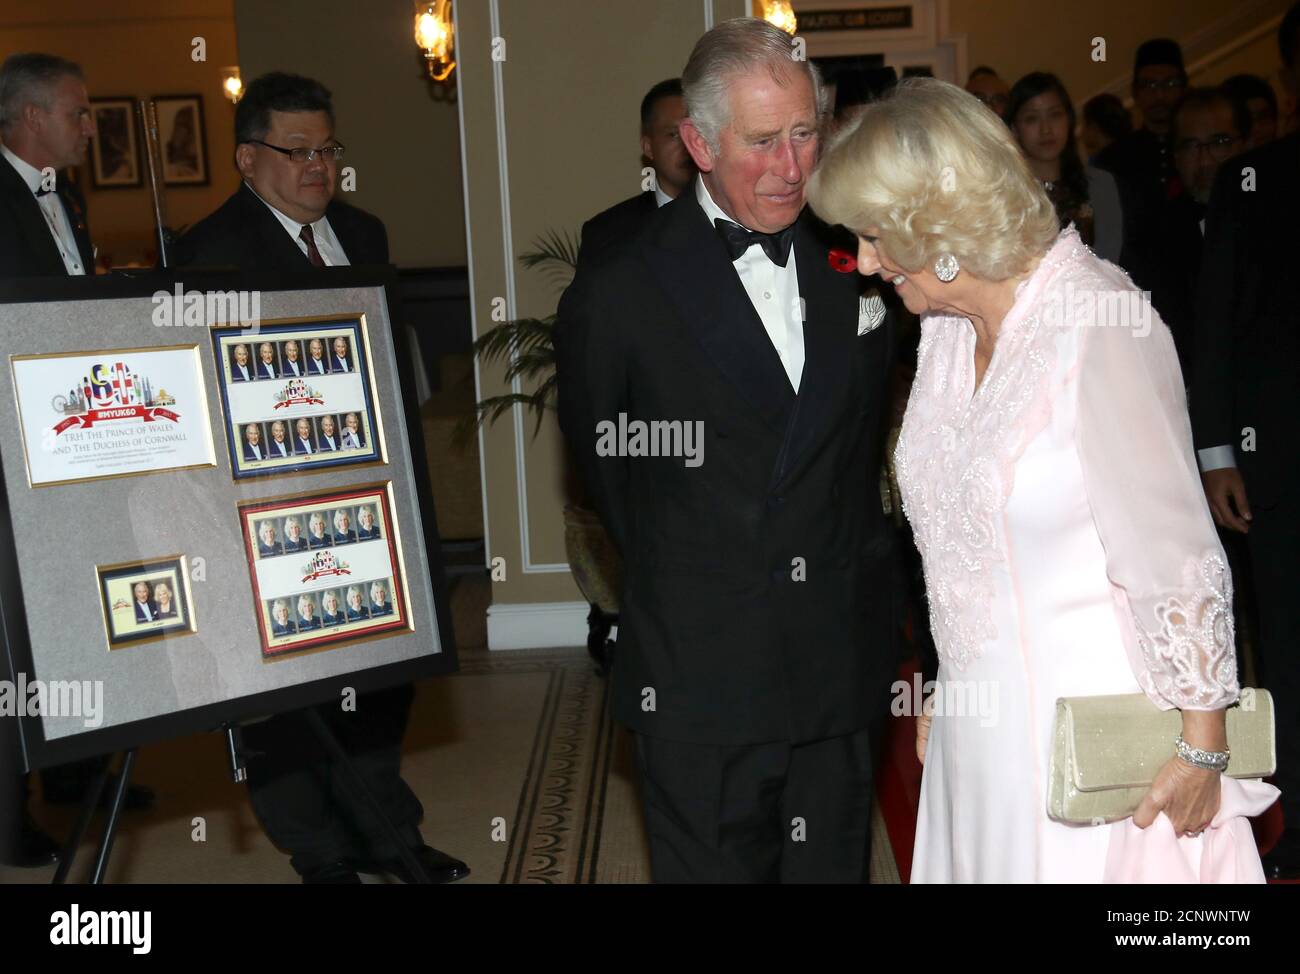 britains-prince-charles-and-camilla-duchess-of-cornwall-look-at-limited-edition-stamps-released-to-celebrate-the-60th-anniversary-of-bilateral-relations-between-the-united-kingdom-and-malaysia-ahead-of-a-gala-dinner-at-the-majestic-hotel-in-kuala-lumpur-malaysia-november-3-2017-reuterschris-jacksonpool-2CNWNTW.jpg